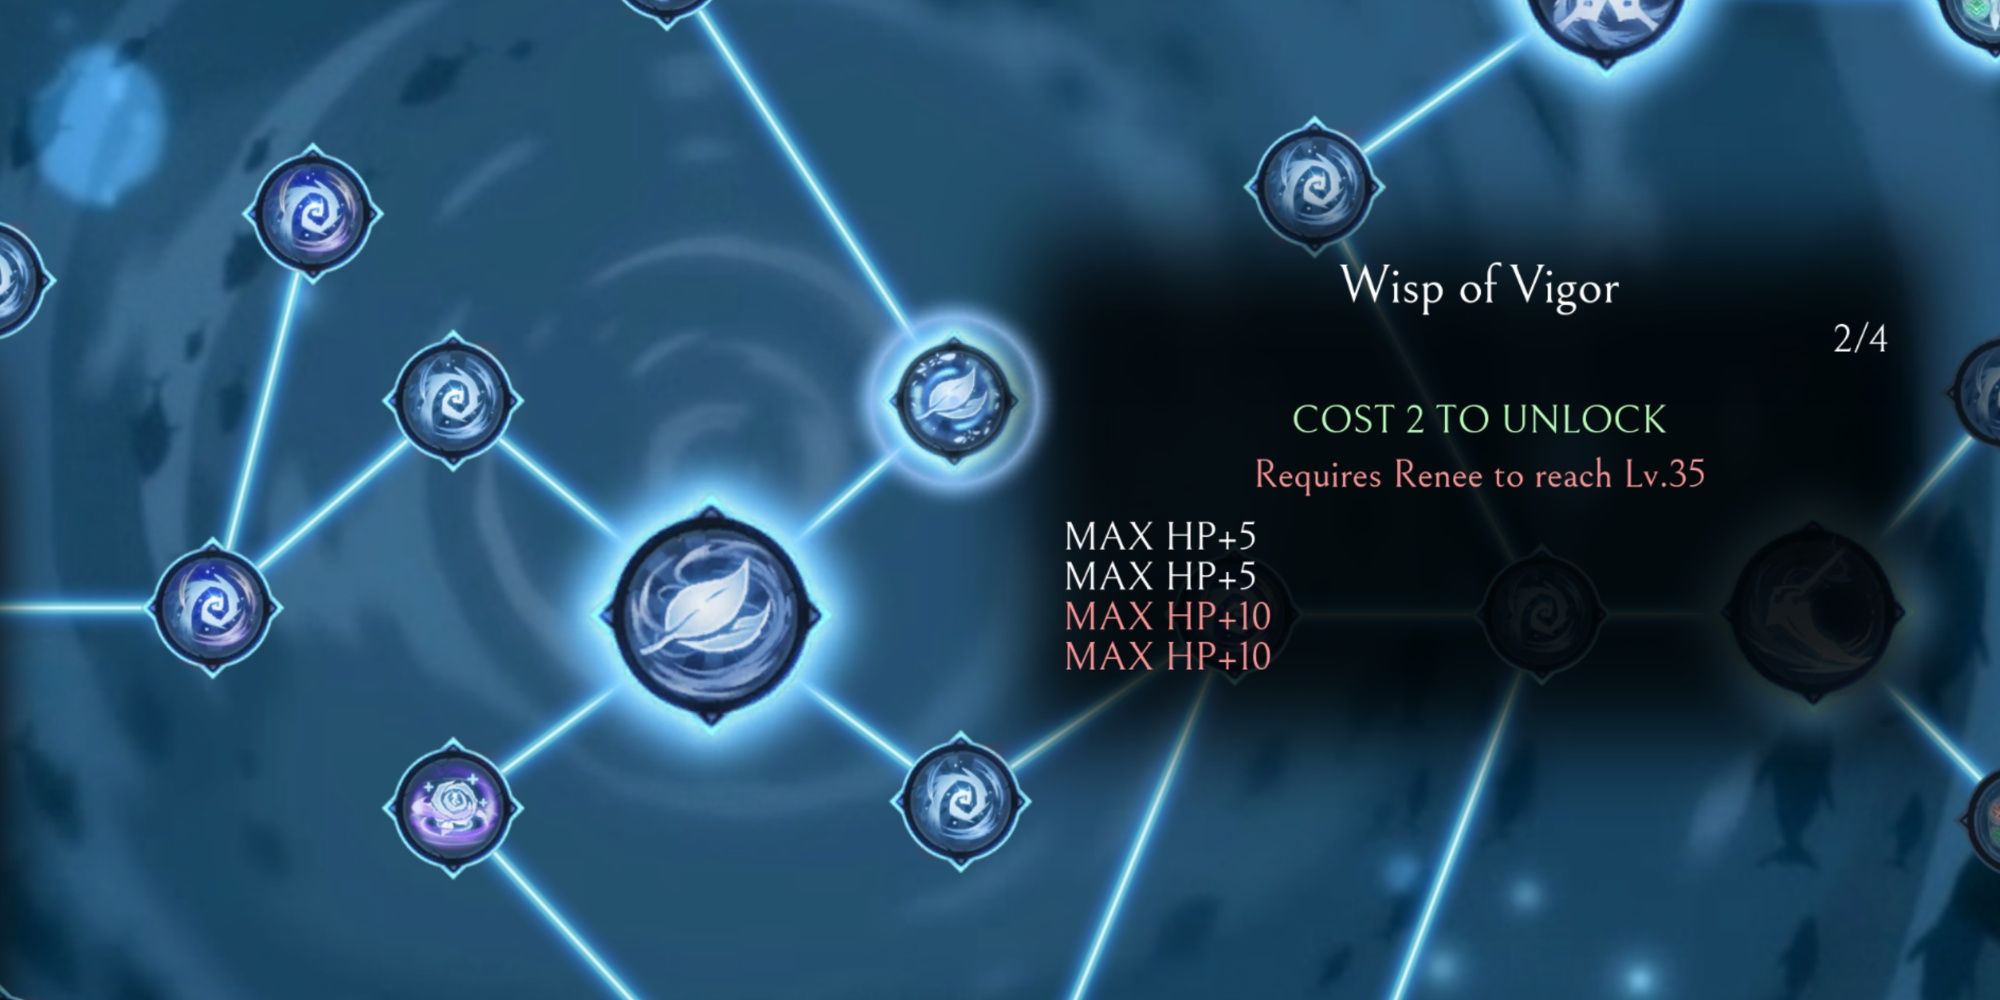 A look at the Upgrades for the Wisp of Vigor Talent in the Talent Tree, showcasing how much you can increase your Max HP in Afterimage